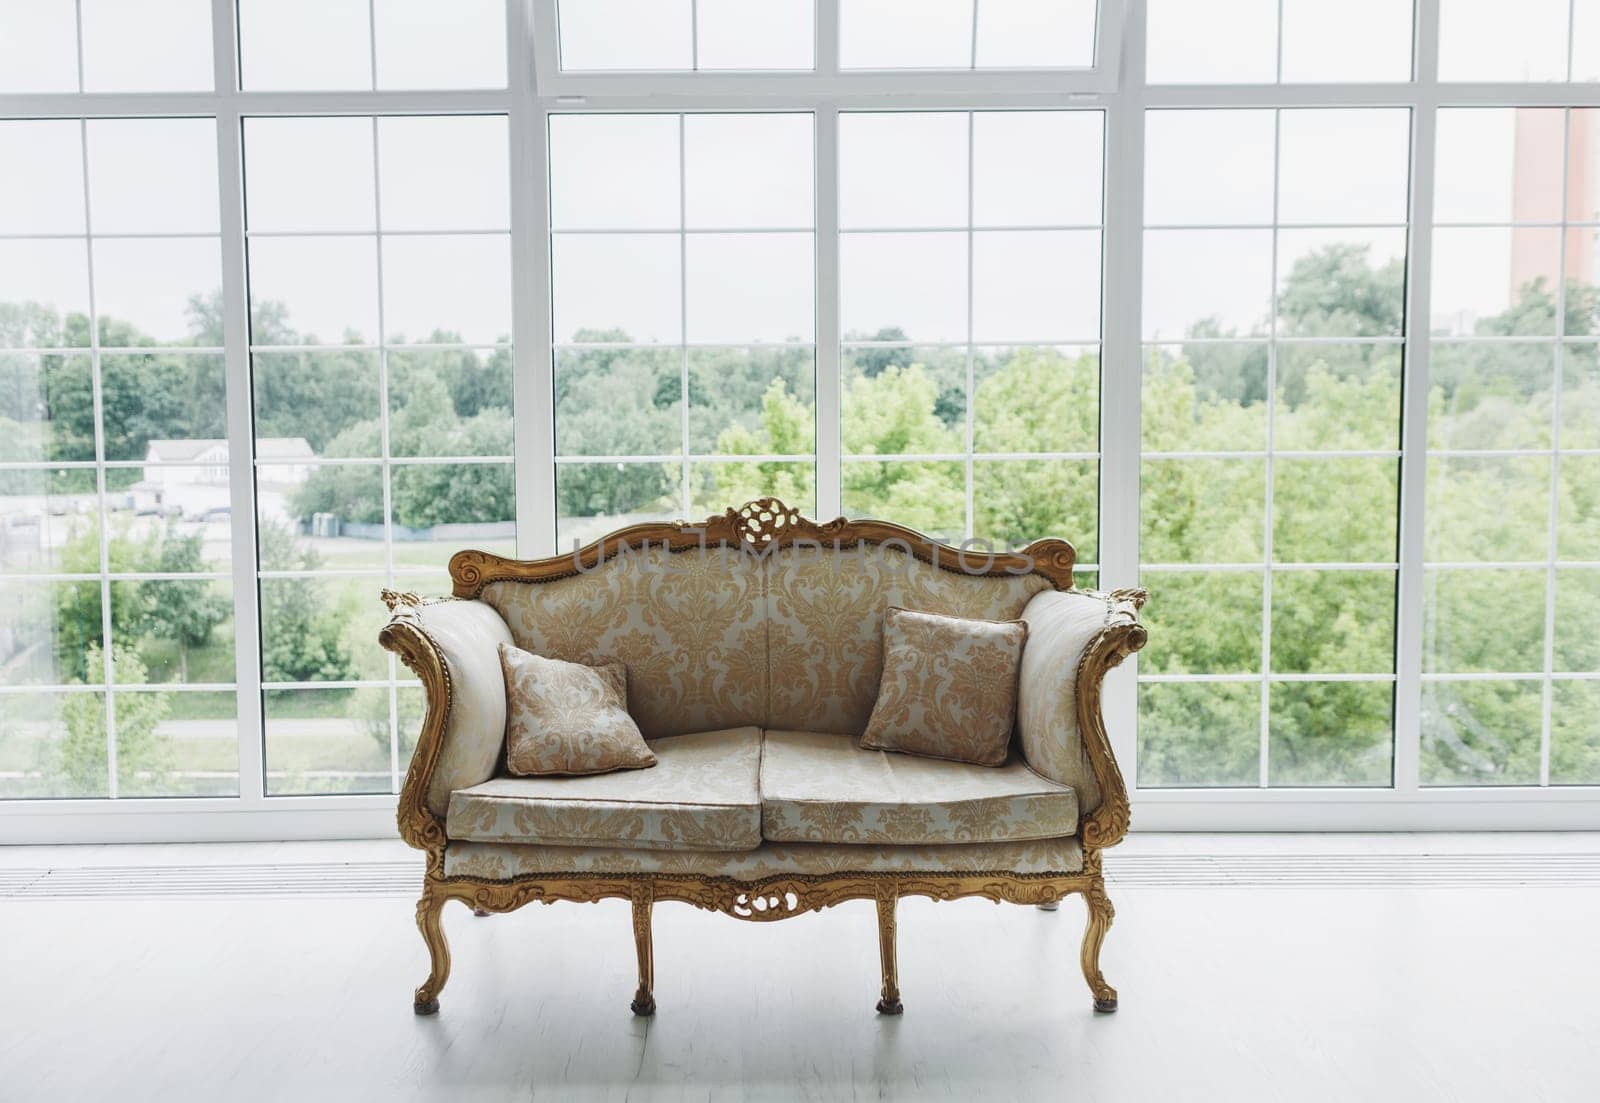 Vintage royal sofa with carved inserts upholstered in fabric on the background of a large window